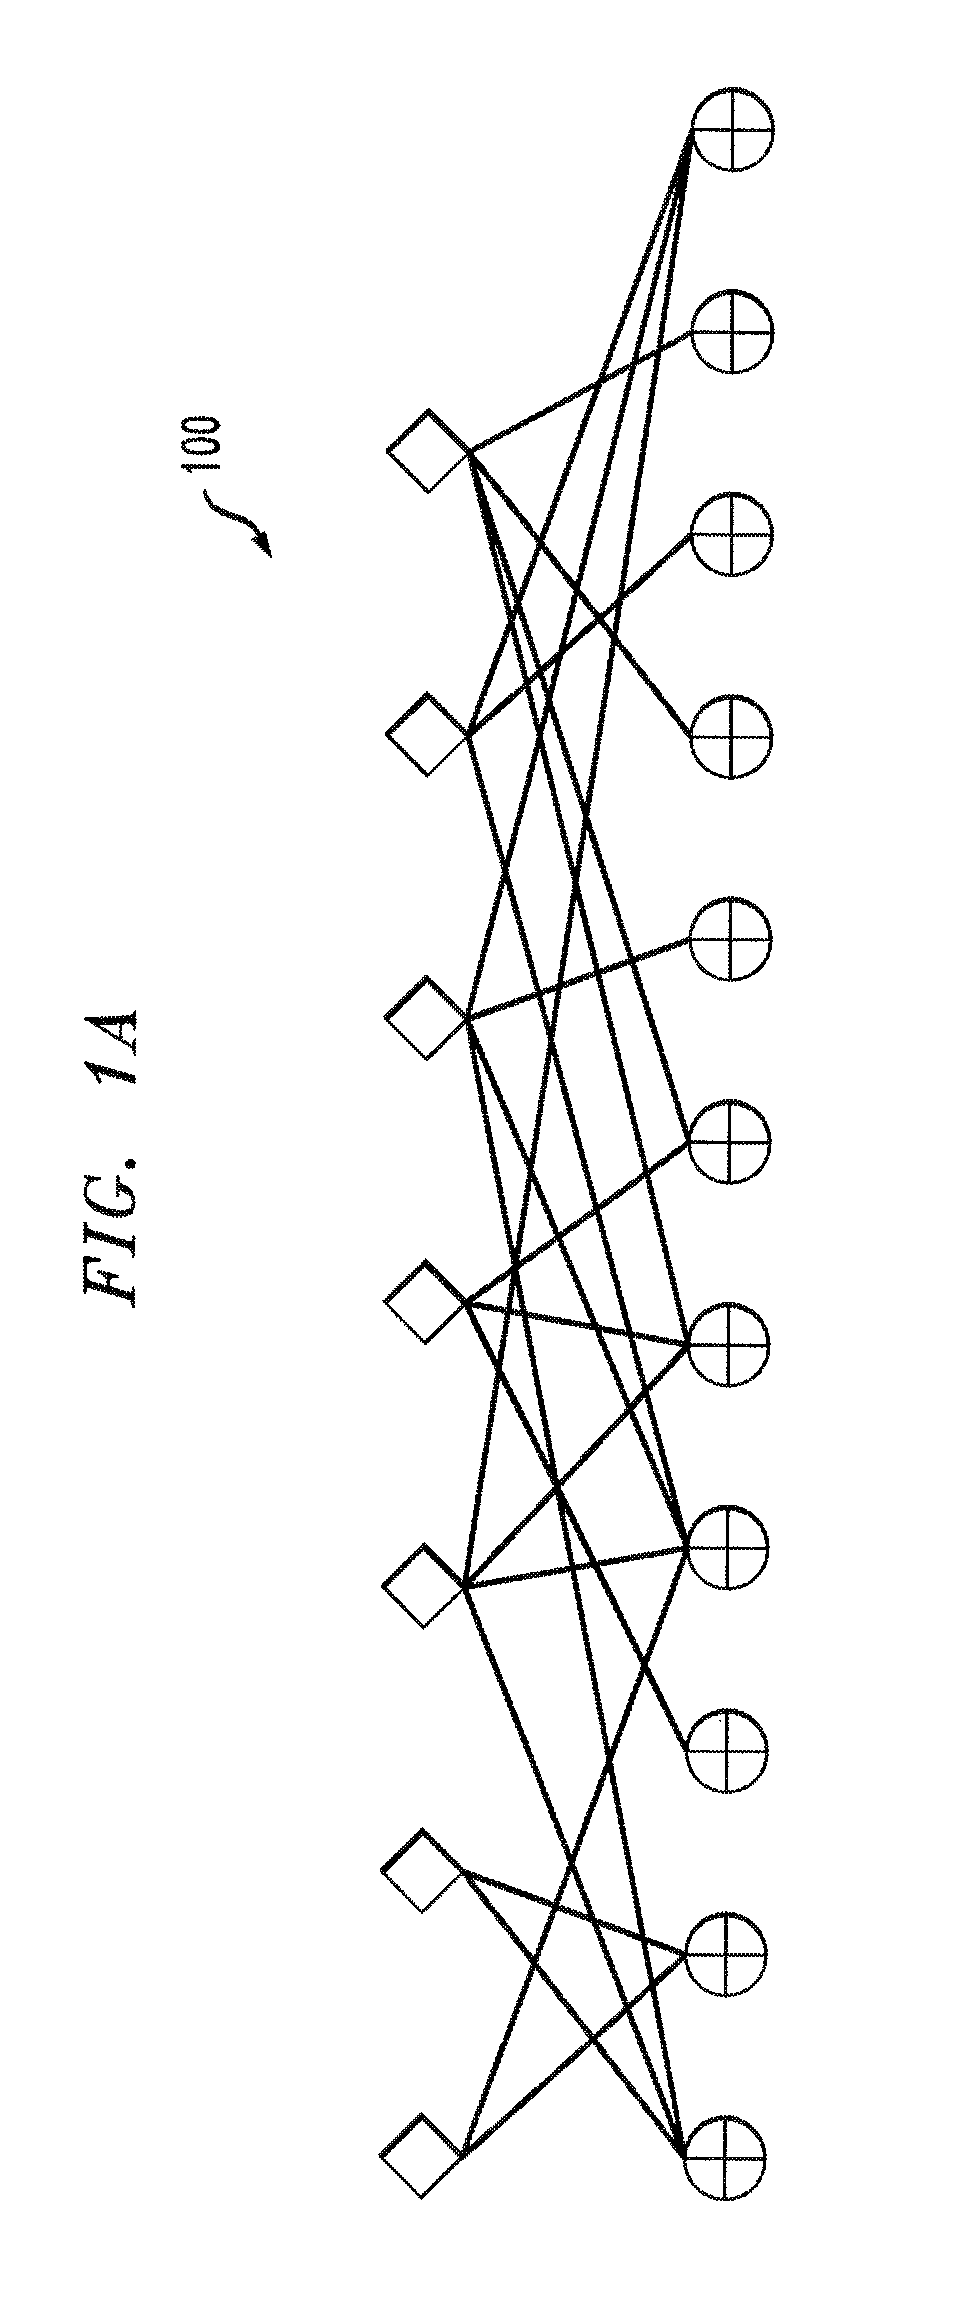 Methods and apparatus for generating authenticated error correcting codes